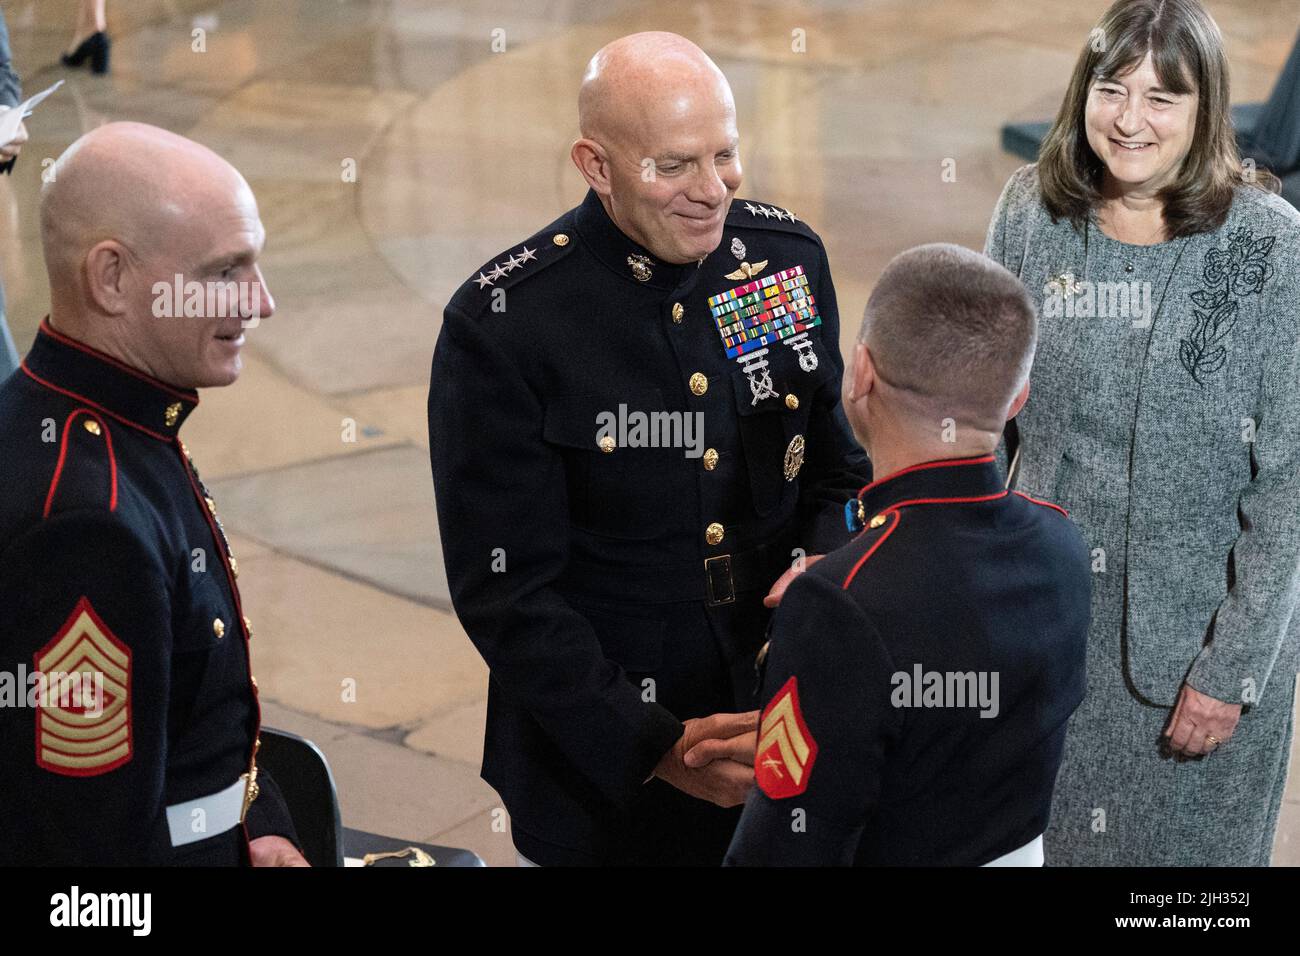 Washington DC, USA. 14th July, 2022. Washington. 14th July, 2022. Sgt. Major of the Marine Corps Troy Black, left, Commandant of the Marine Corps Gen. David Berger, and his wife Donna Berger, greet Medal of Honor recipient Marine Cpl. William 'Kyle' Carpenter, before the flag-draped casket bearing the remains of Hershel W. Woody Williams arrives to lie in honor in the U.S. Capitol, Thursday, July 14, 2022 in Washington. Williams, the last remaining Medal of Honor recipient from World War II, died at age 98. Credit: Alex Brandon/Pool via CNP/dpa/Alamy Live News Credit: dpa picture alliance/Al Stock Photo